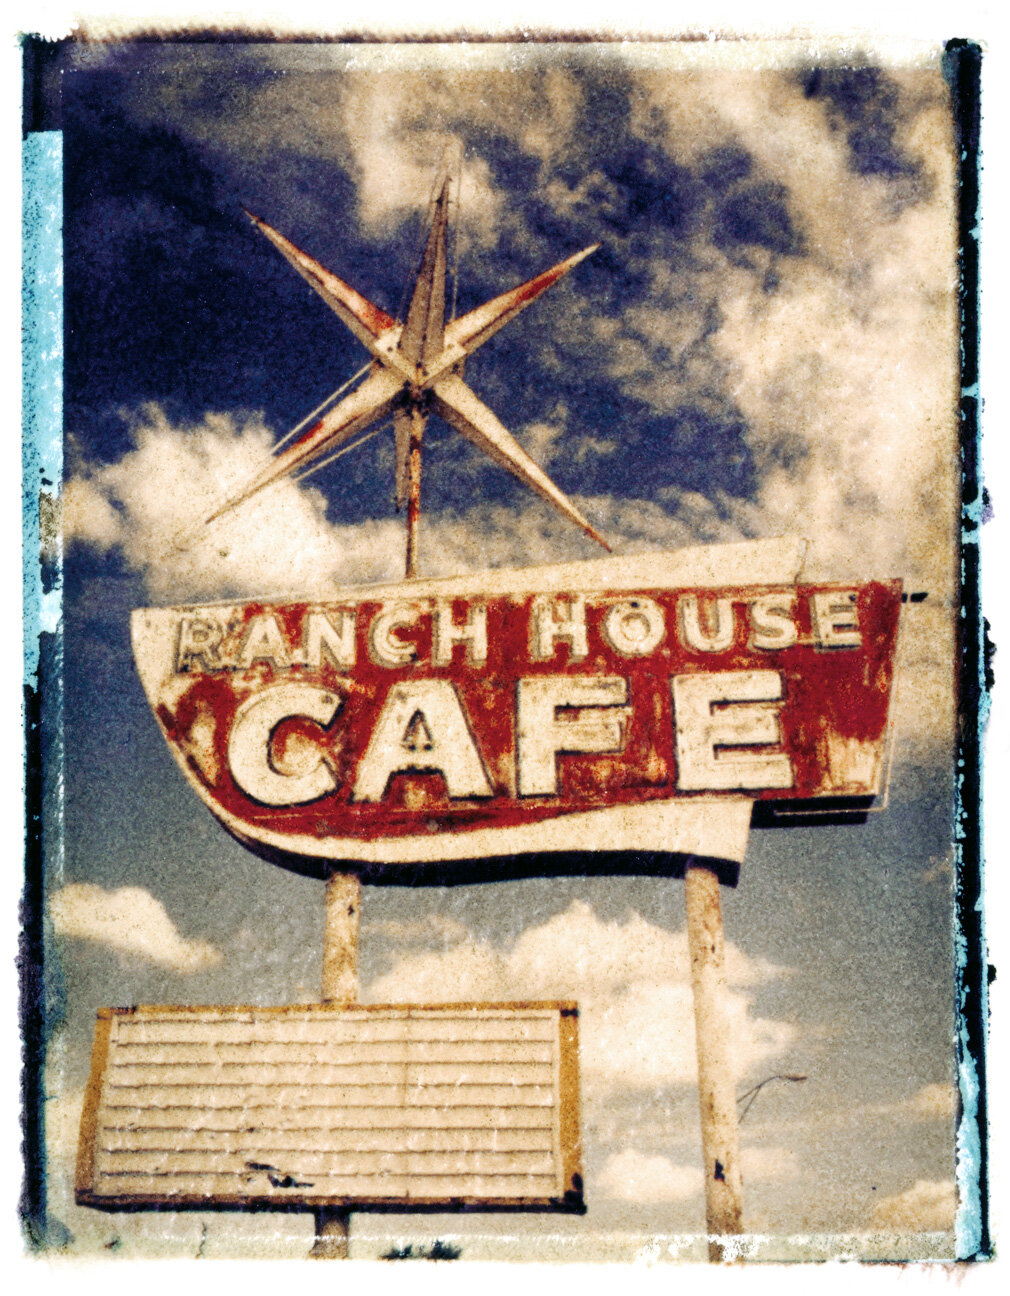 Ranch House Cafe, photographed in Vaughn, New Mexico